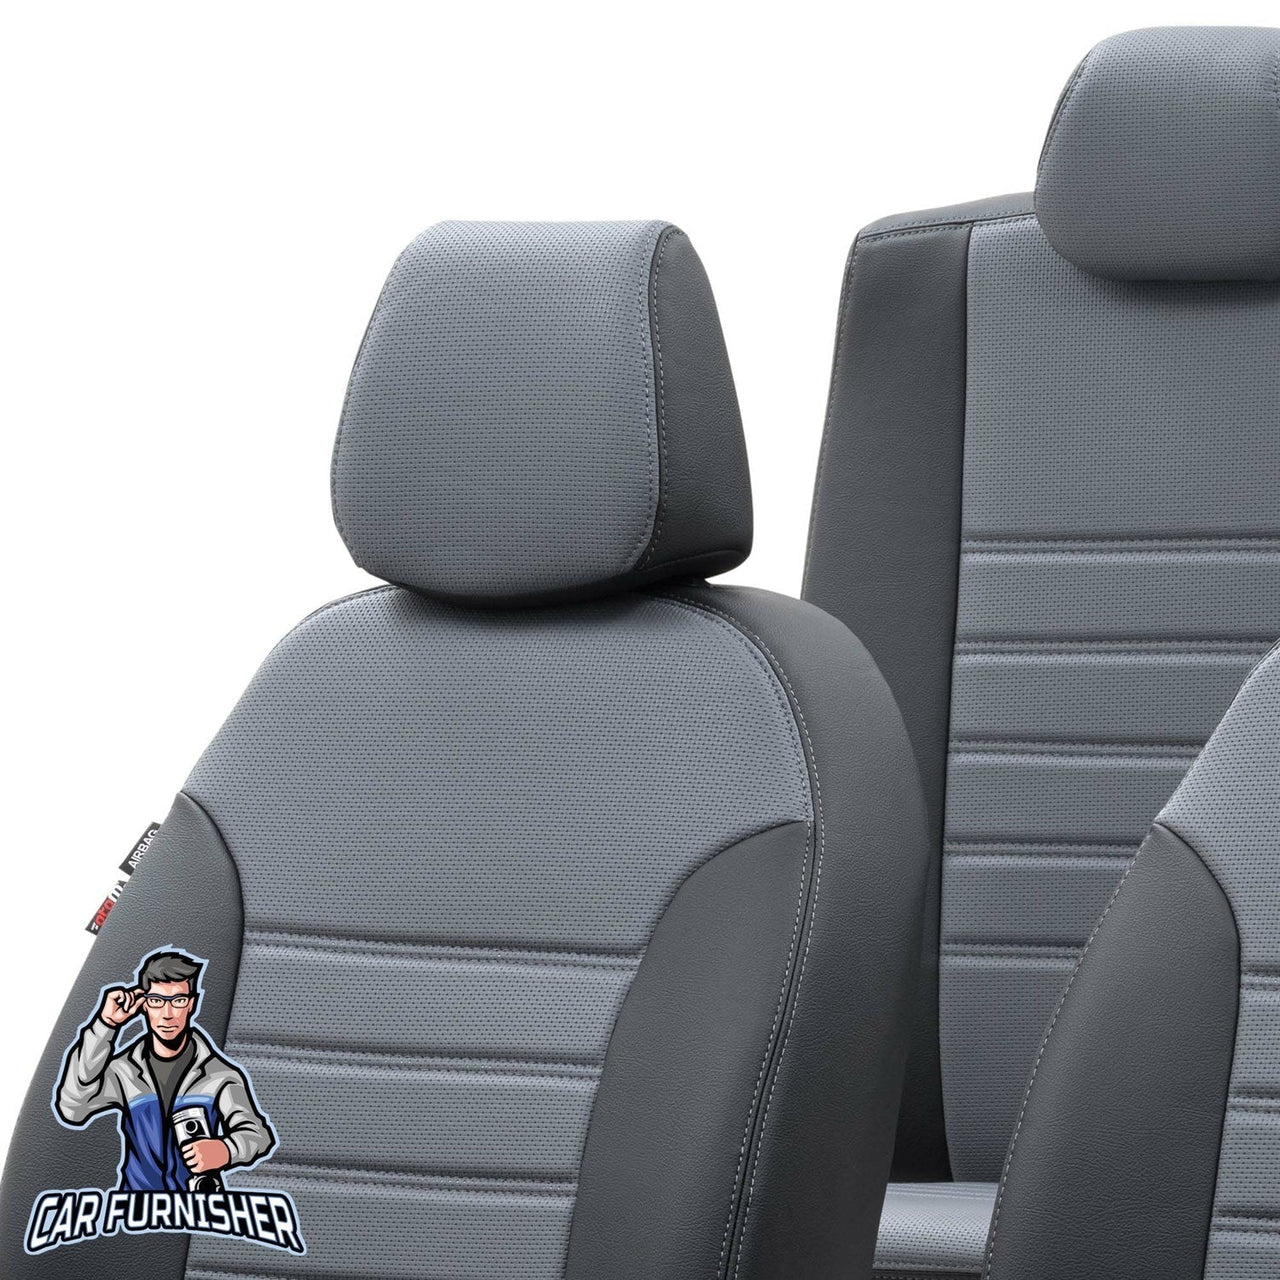 Chevrolet Spark Seat Covers New York Leather Design Smoked Black Leather